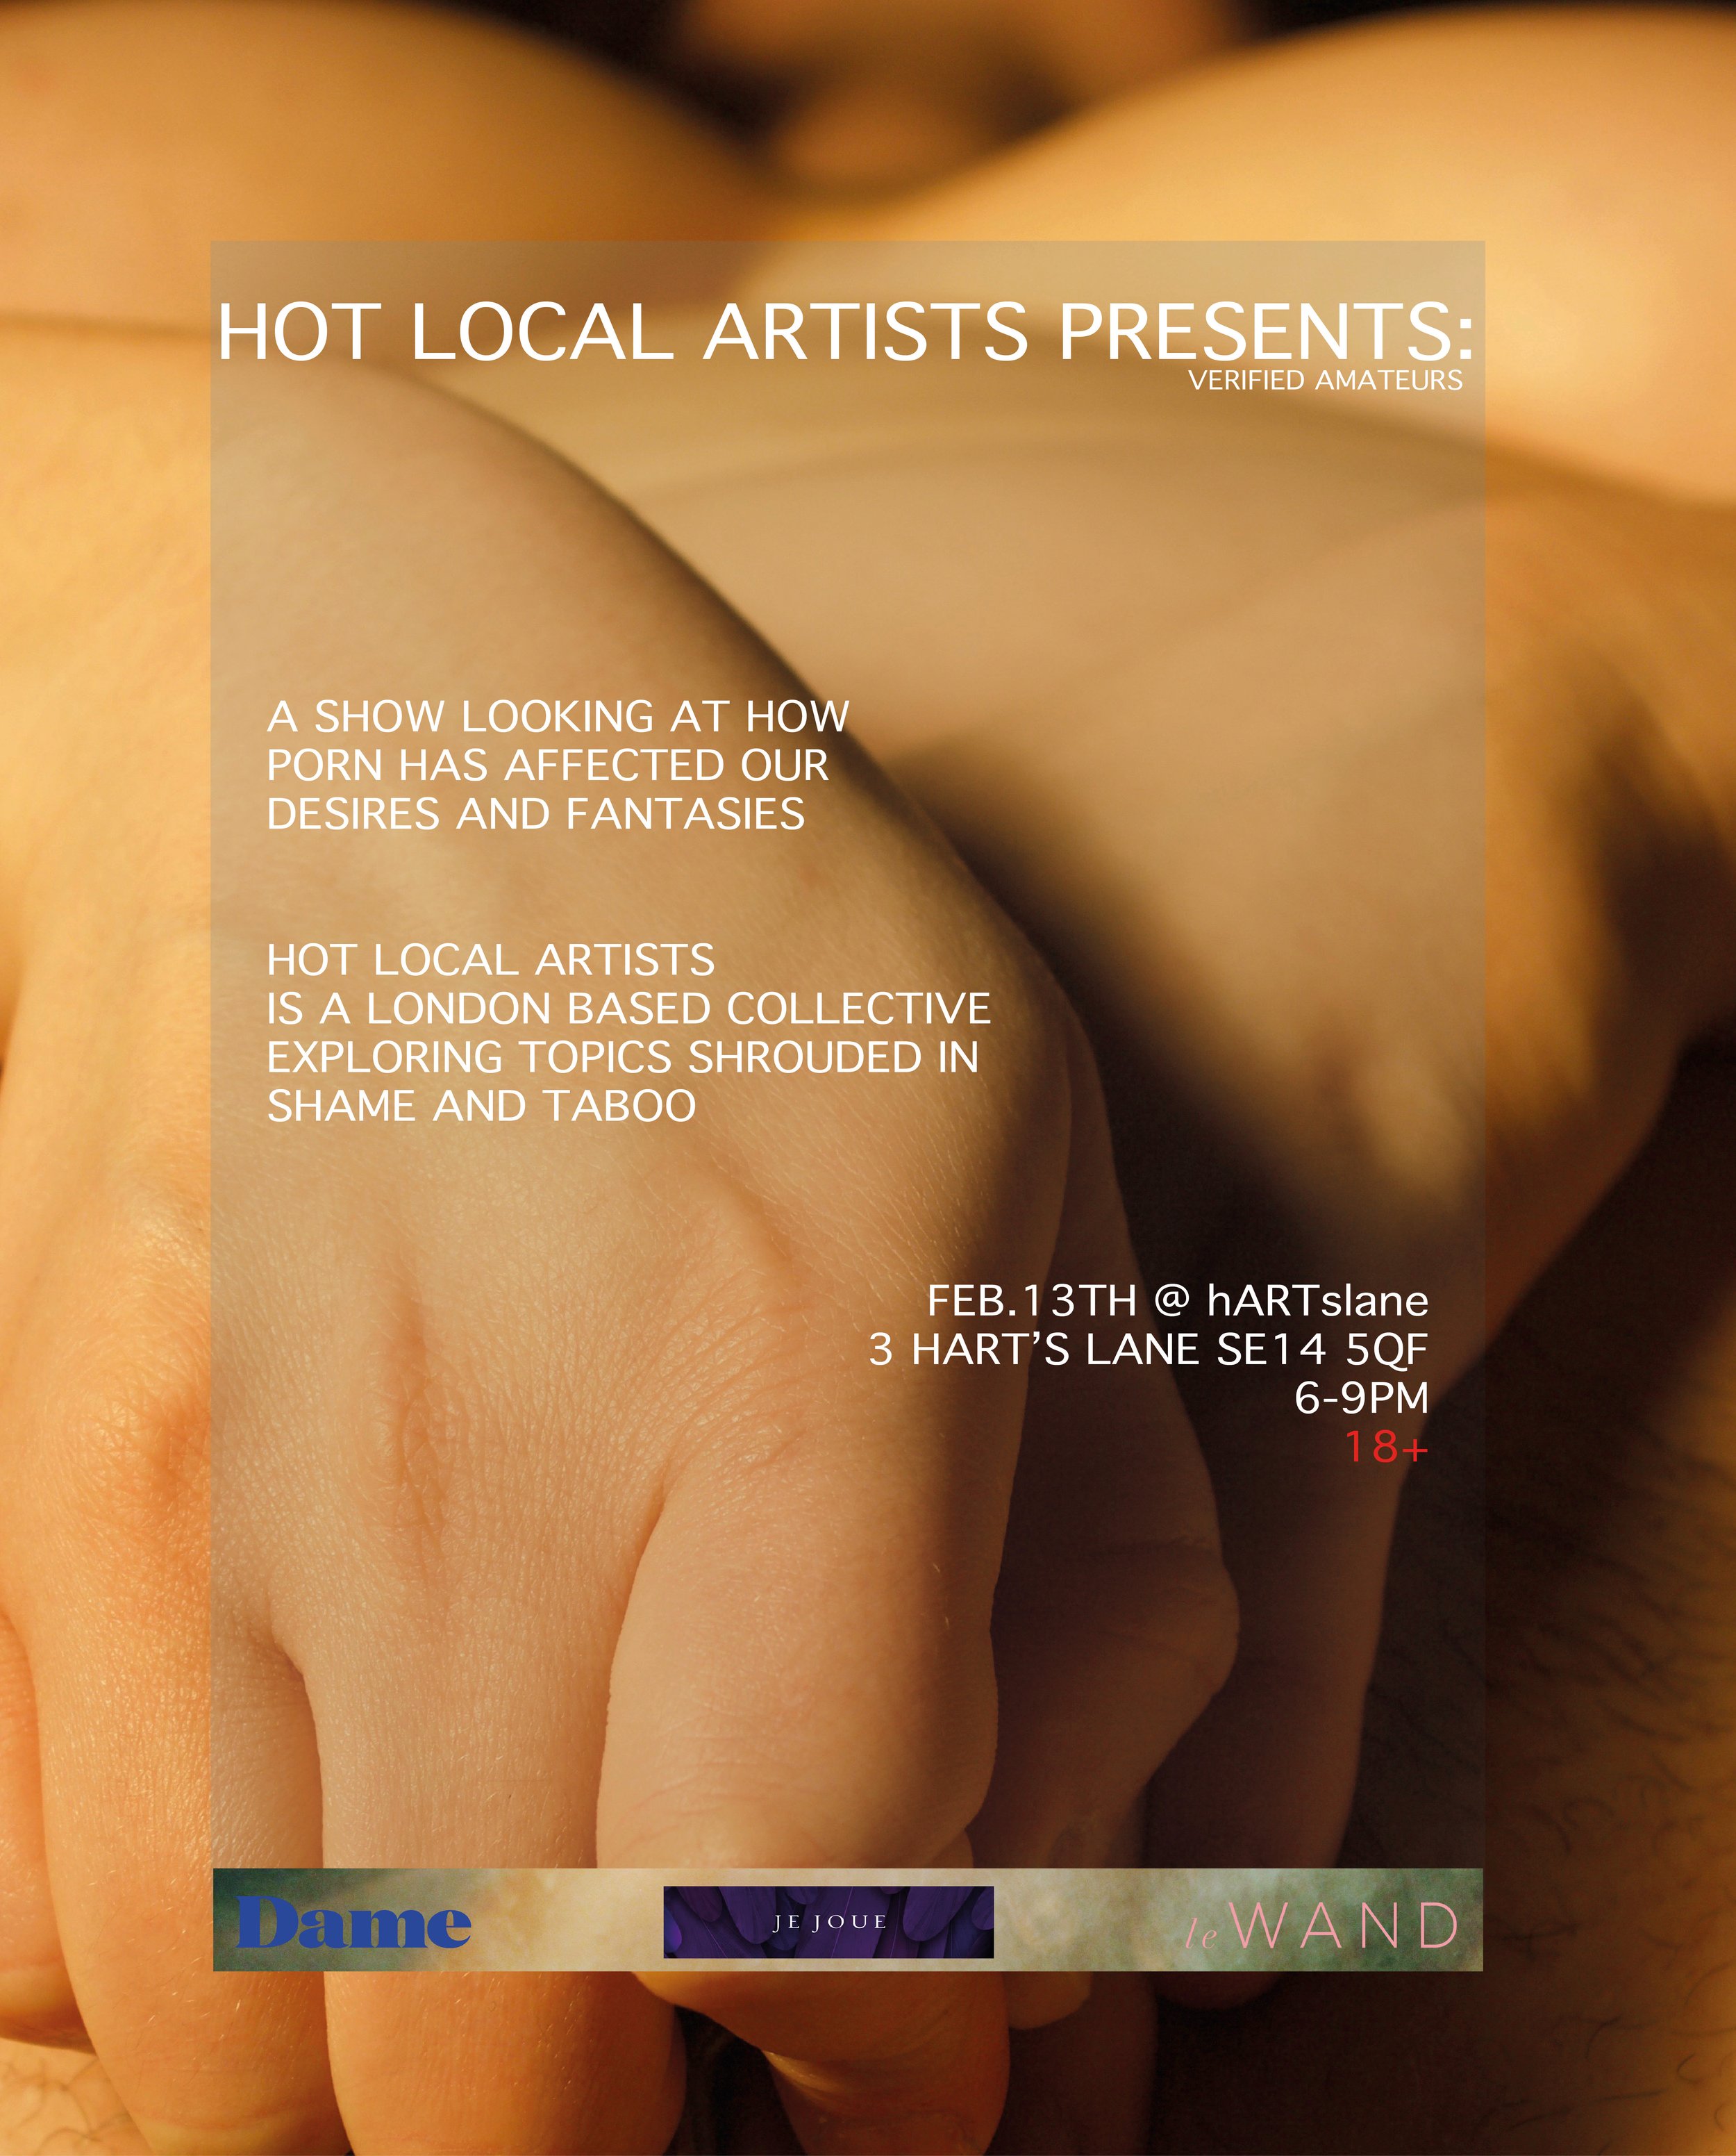 HOT LOCAL ARTISTS MY POSTER.jpeg